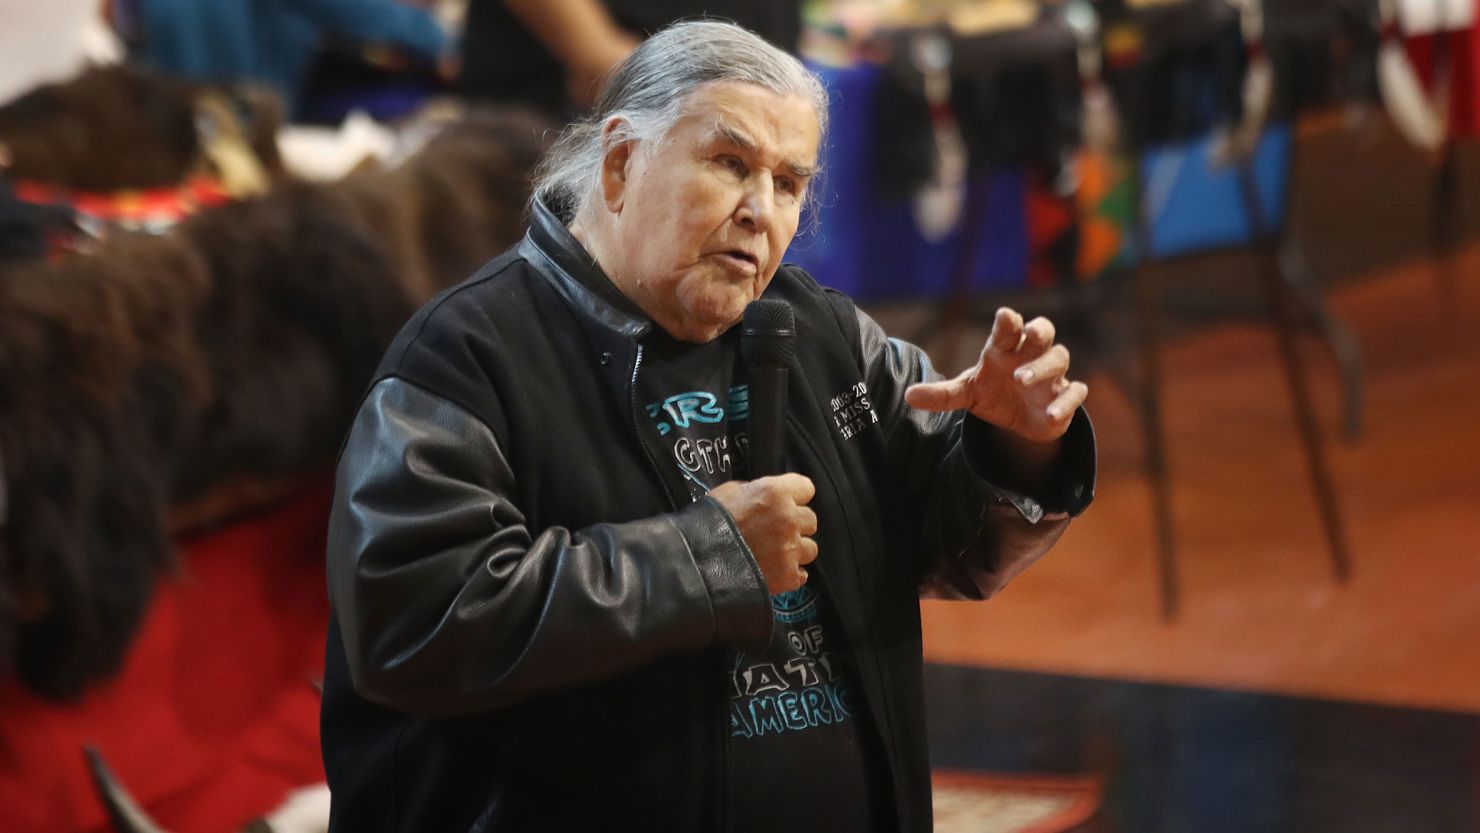 Clyde Bellecourt spoke during an all-night visitation for AIM co-founder Dennis Banks, at the American Indian Center in Minneapolis in 2017.